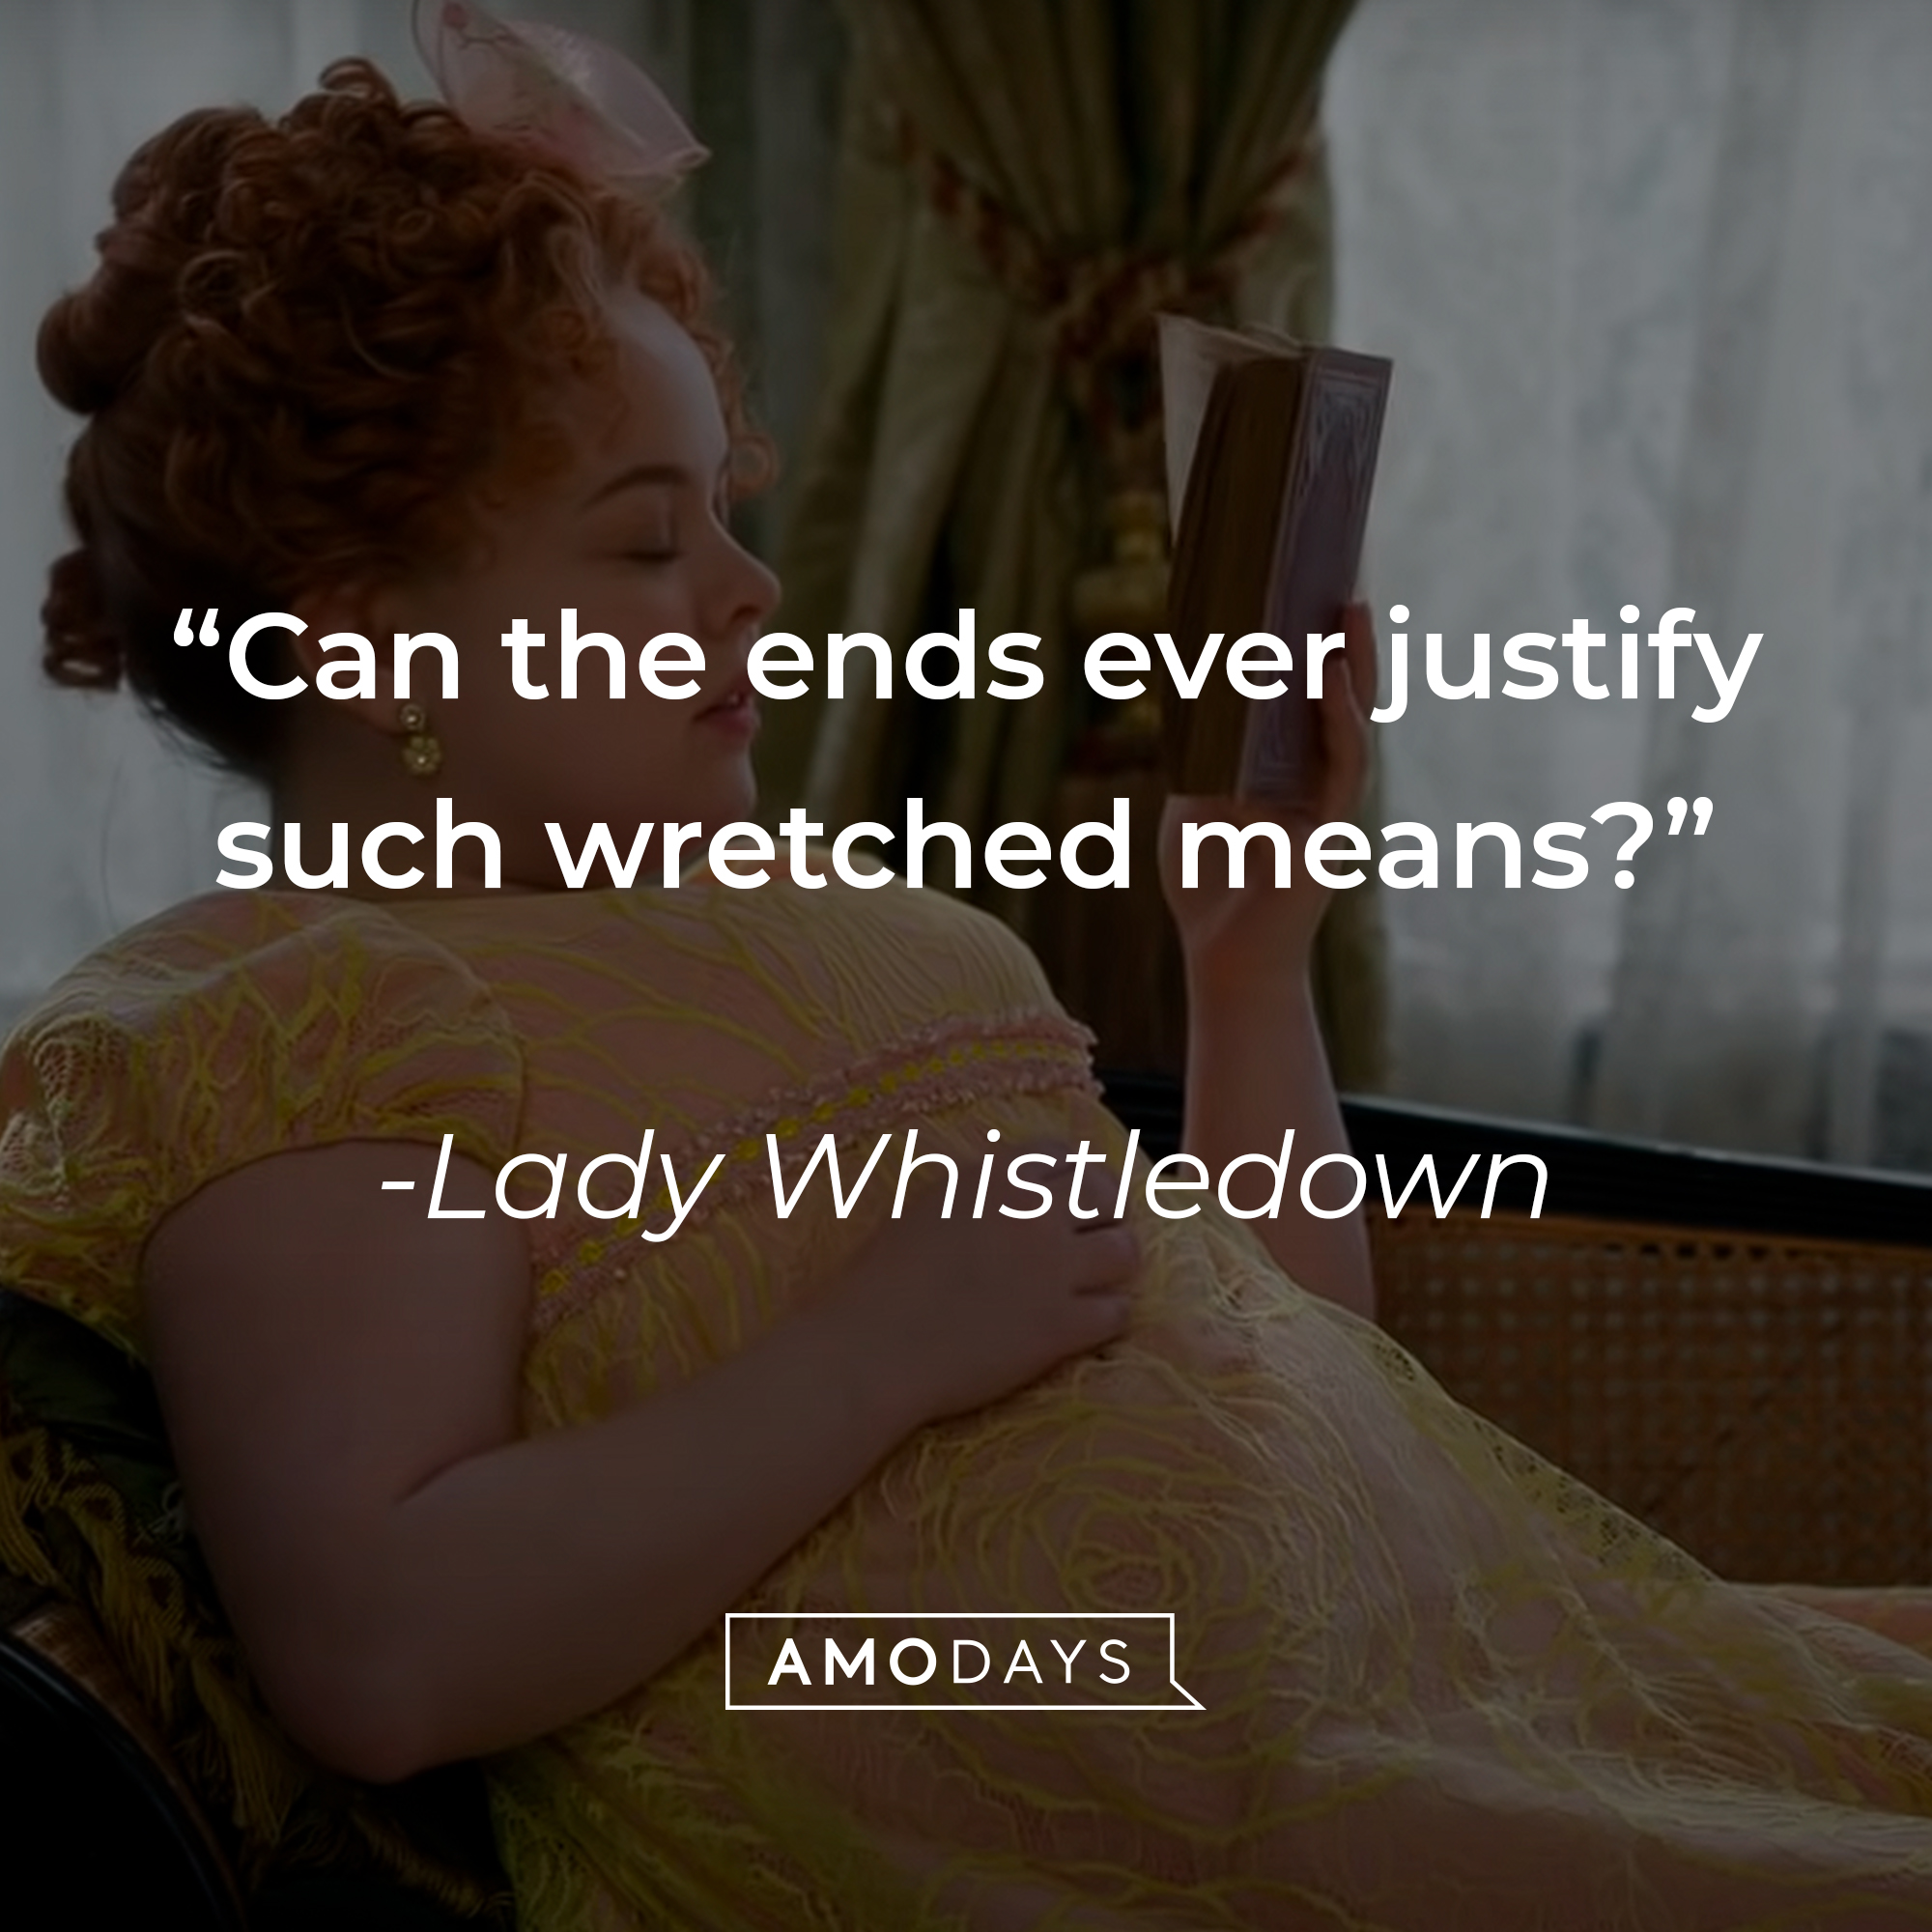 Lady Whistledown's quote: "Can the ends ever justify such wretched means?" | Source: Youtube.com/Netflix